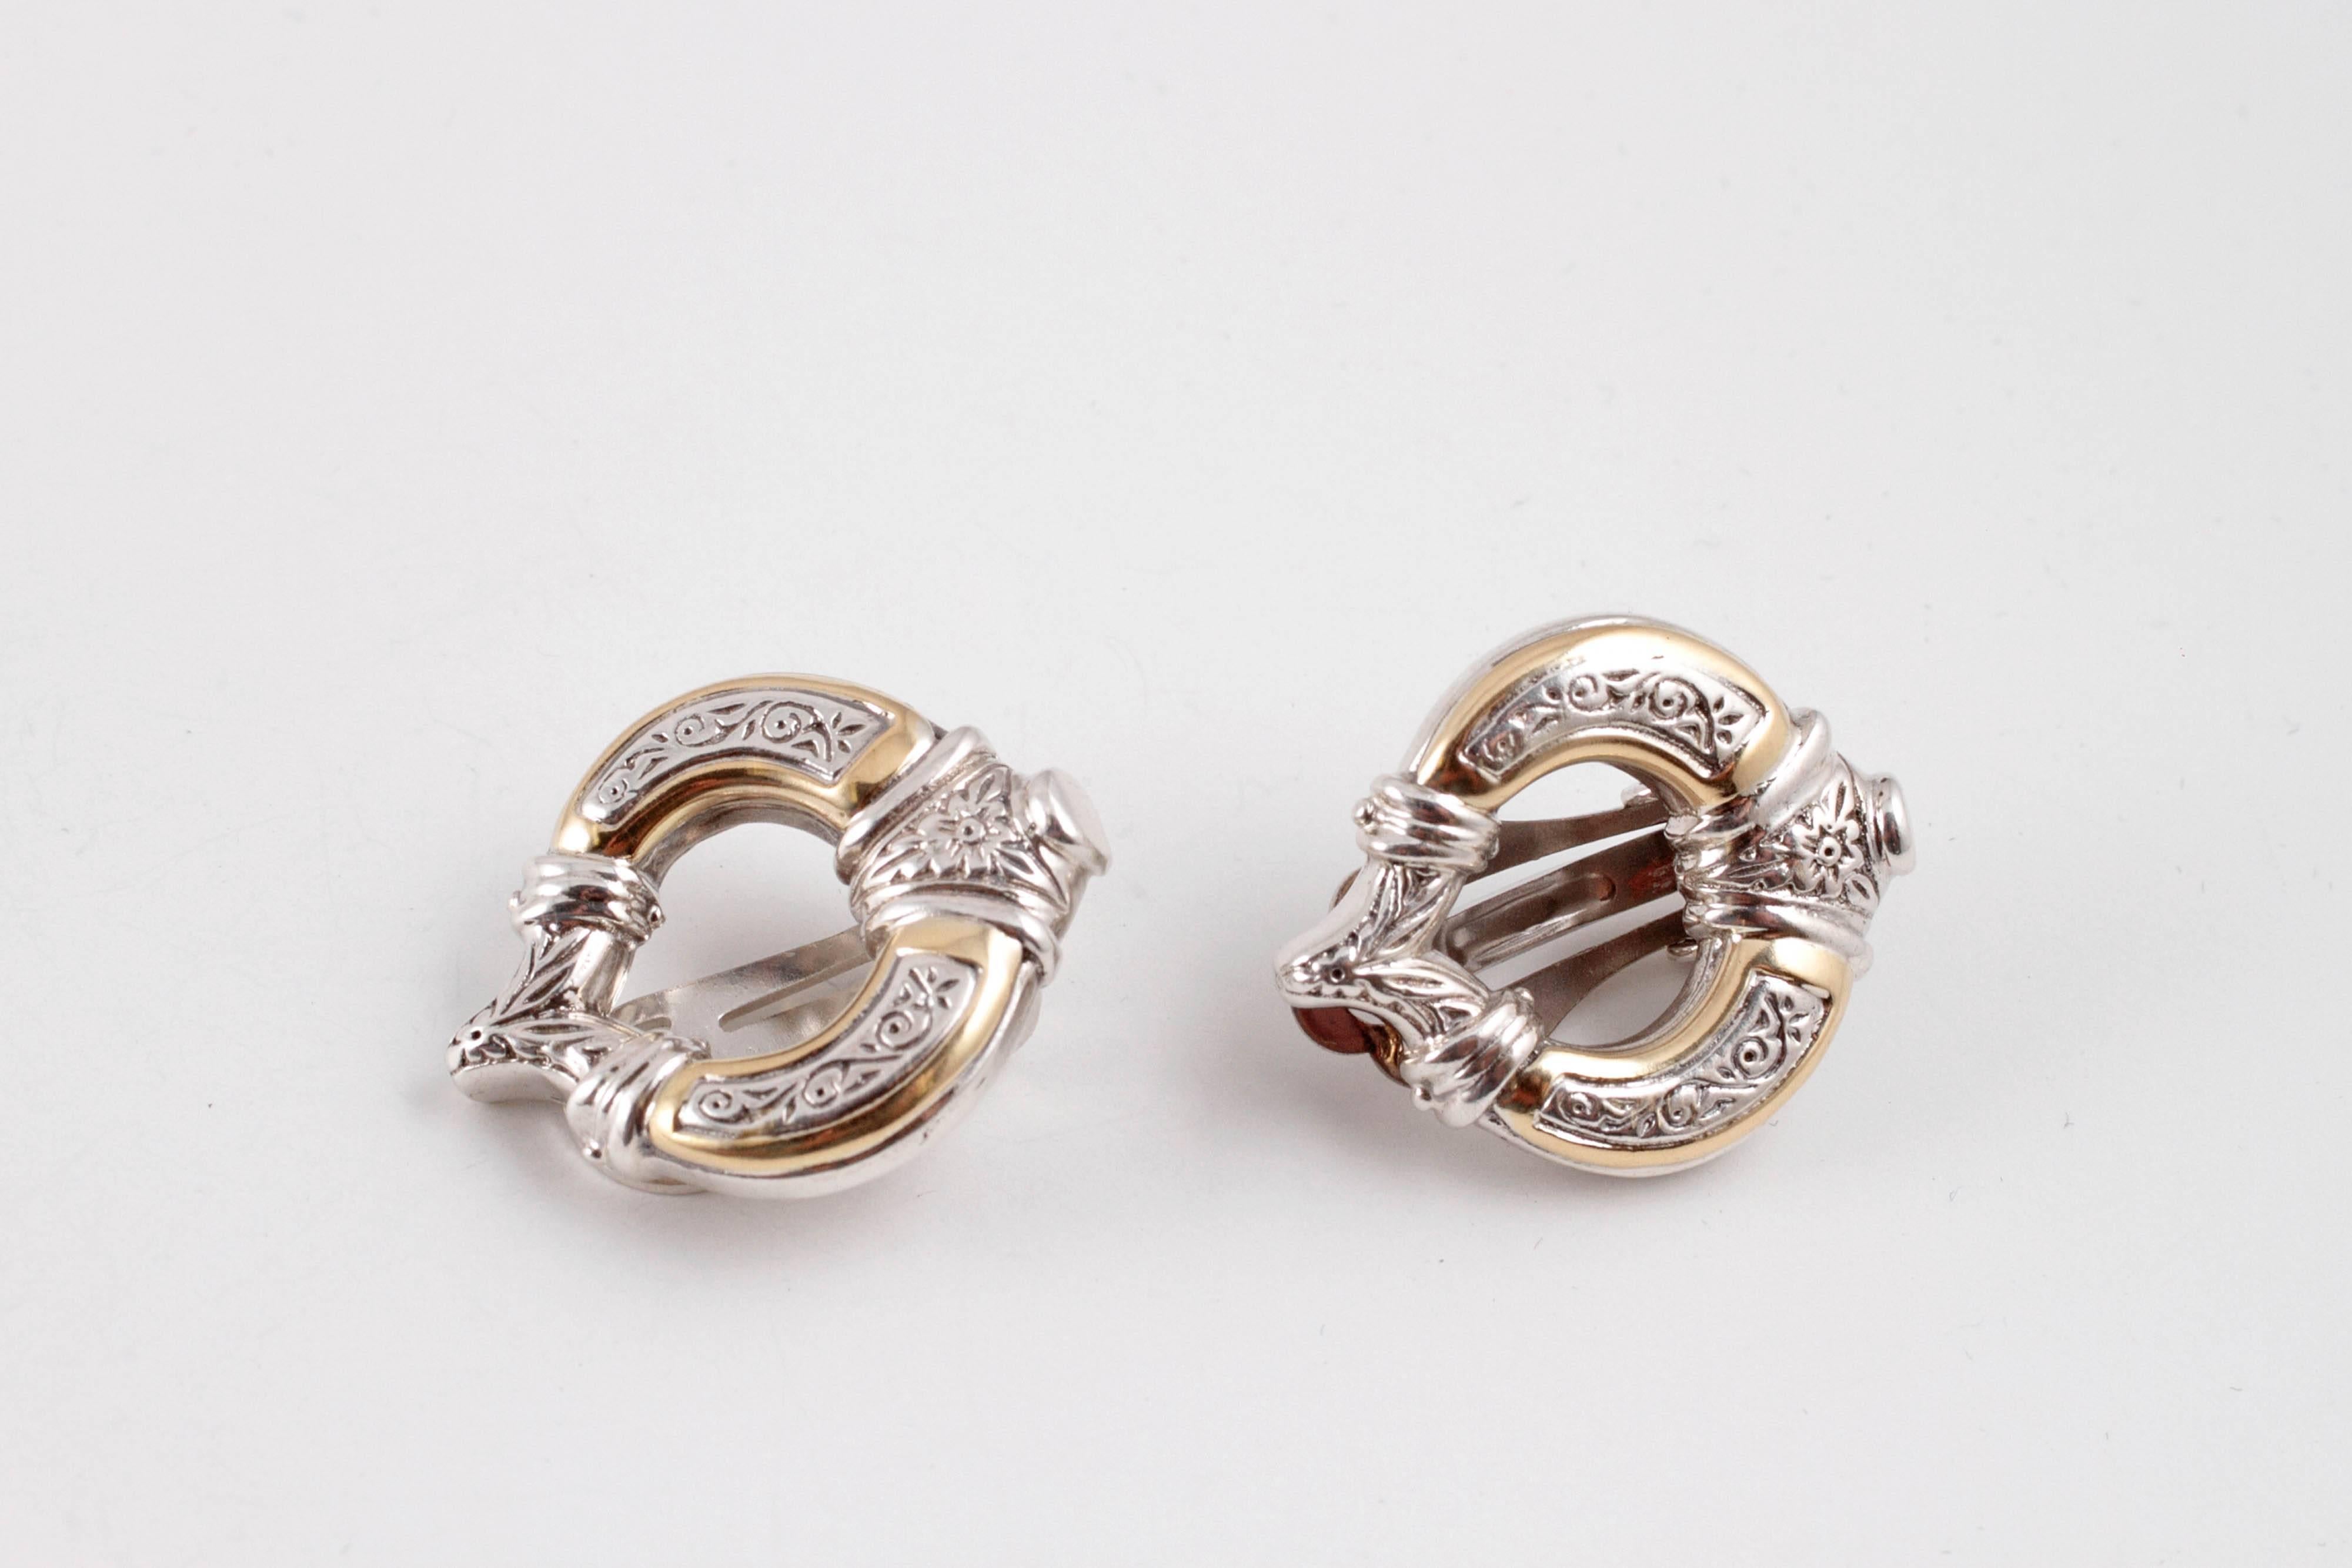 18 karat yellow gold and sterling silver clip on earrings.  Lovely!